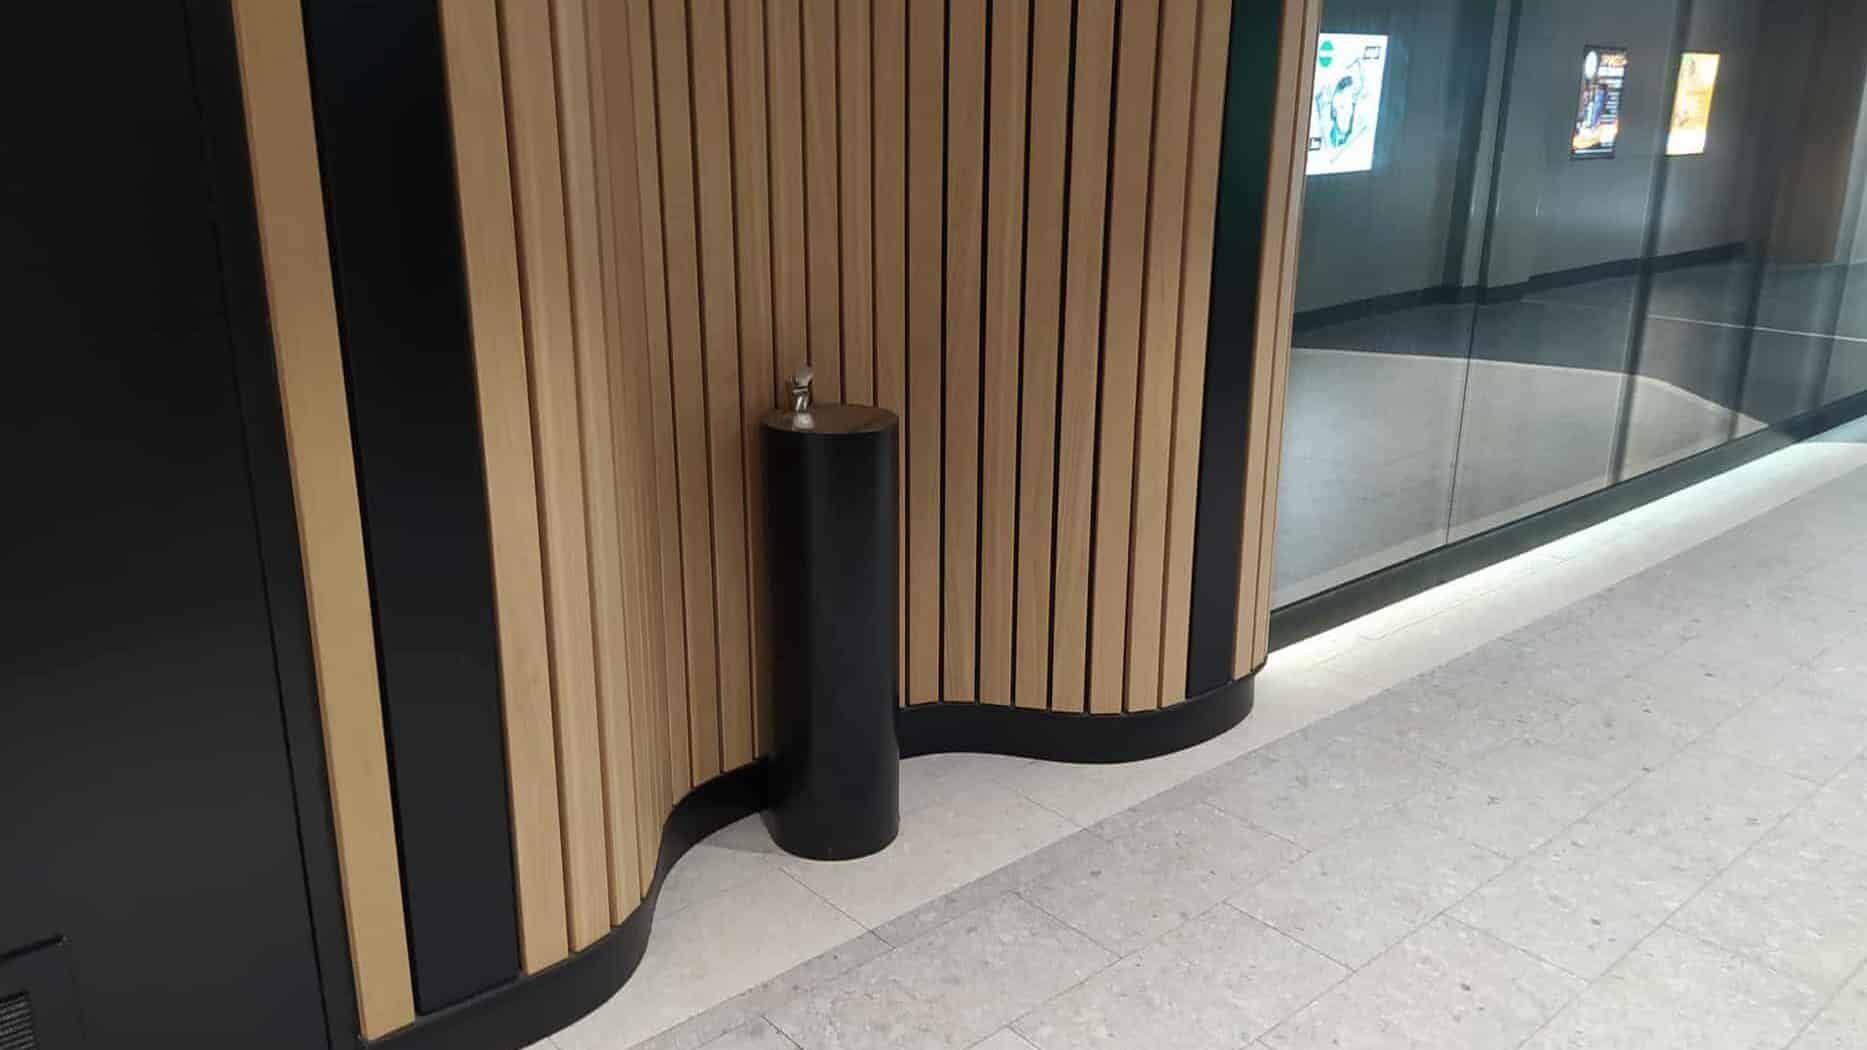 Drinking water dispenser located in a public building